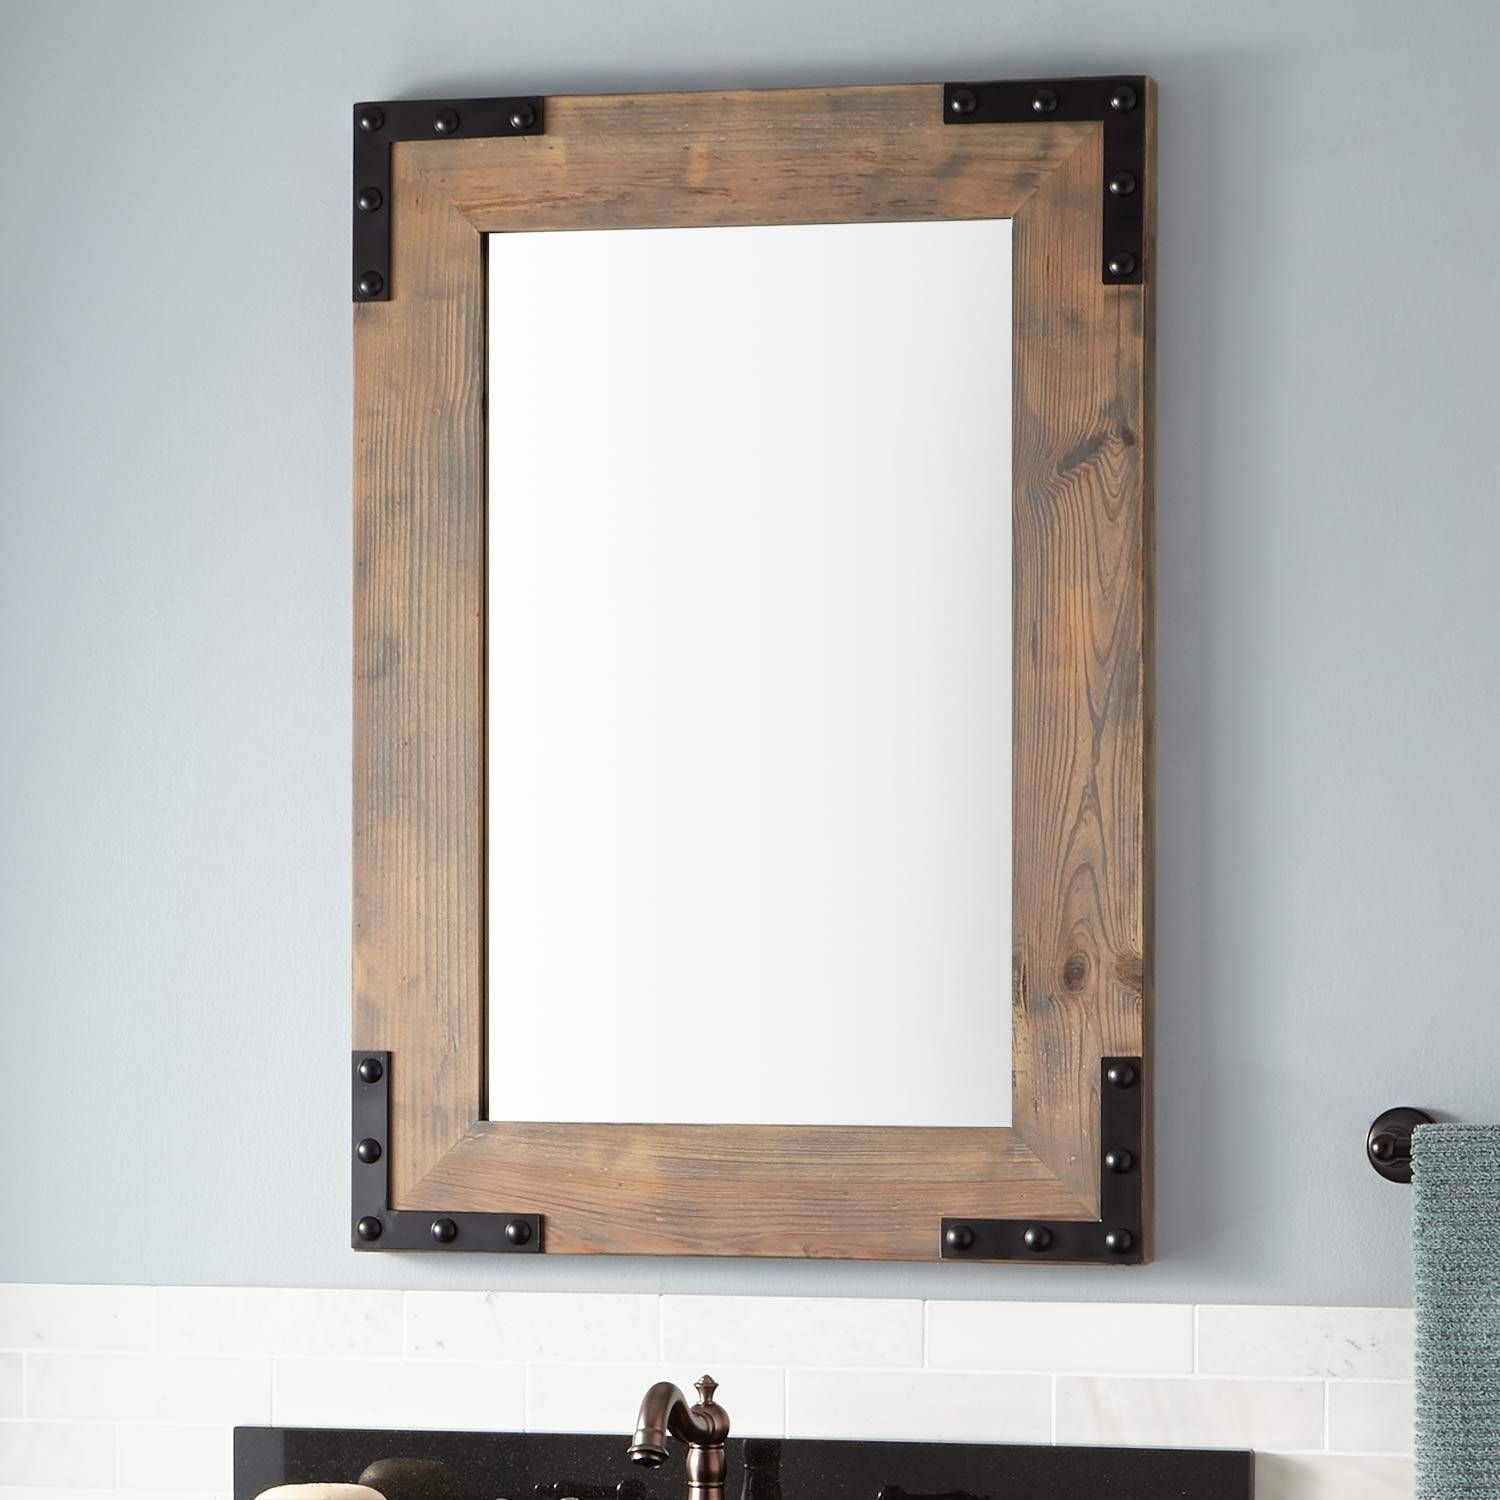 Framed Bathroom Mirrors | Signature Hardware Throughout Wooden Mirrors (View 12 of 15)